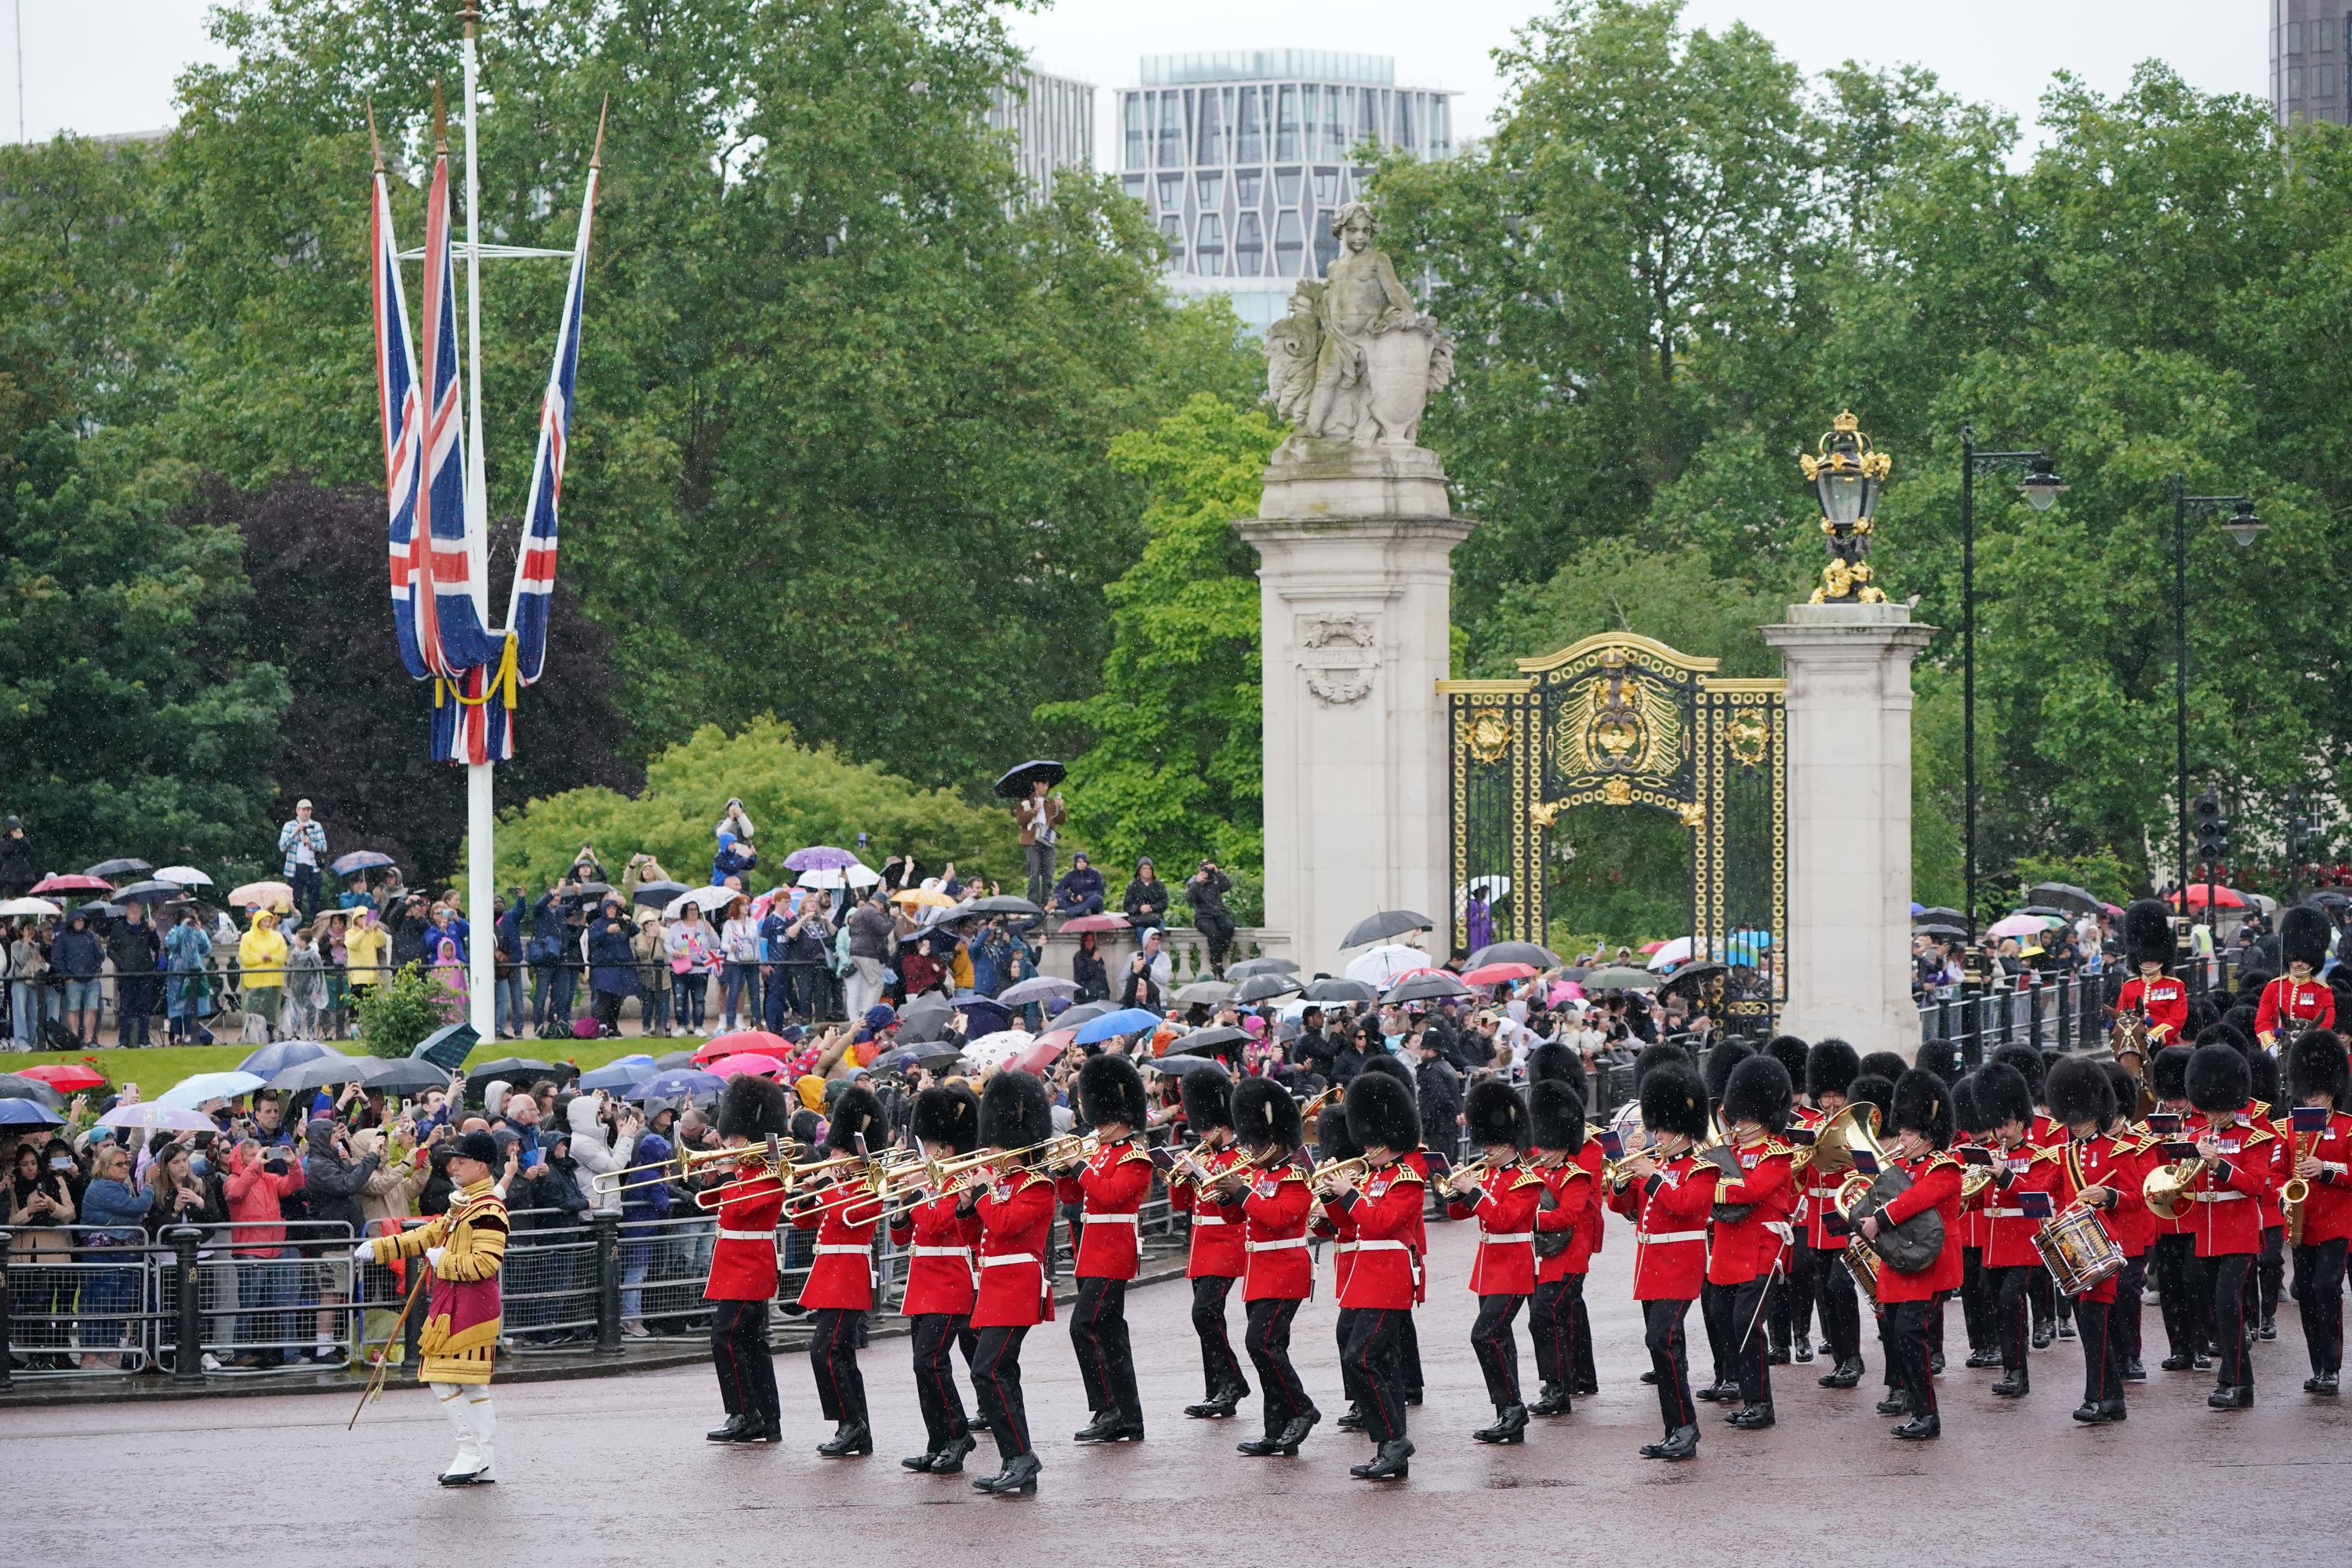 The Band of the Grenadier Guards marched down the Mall to the Horse Guards Parade